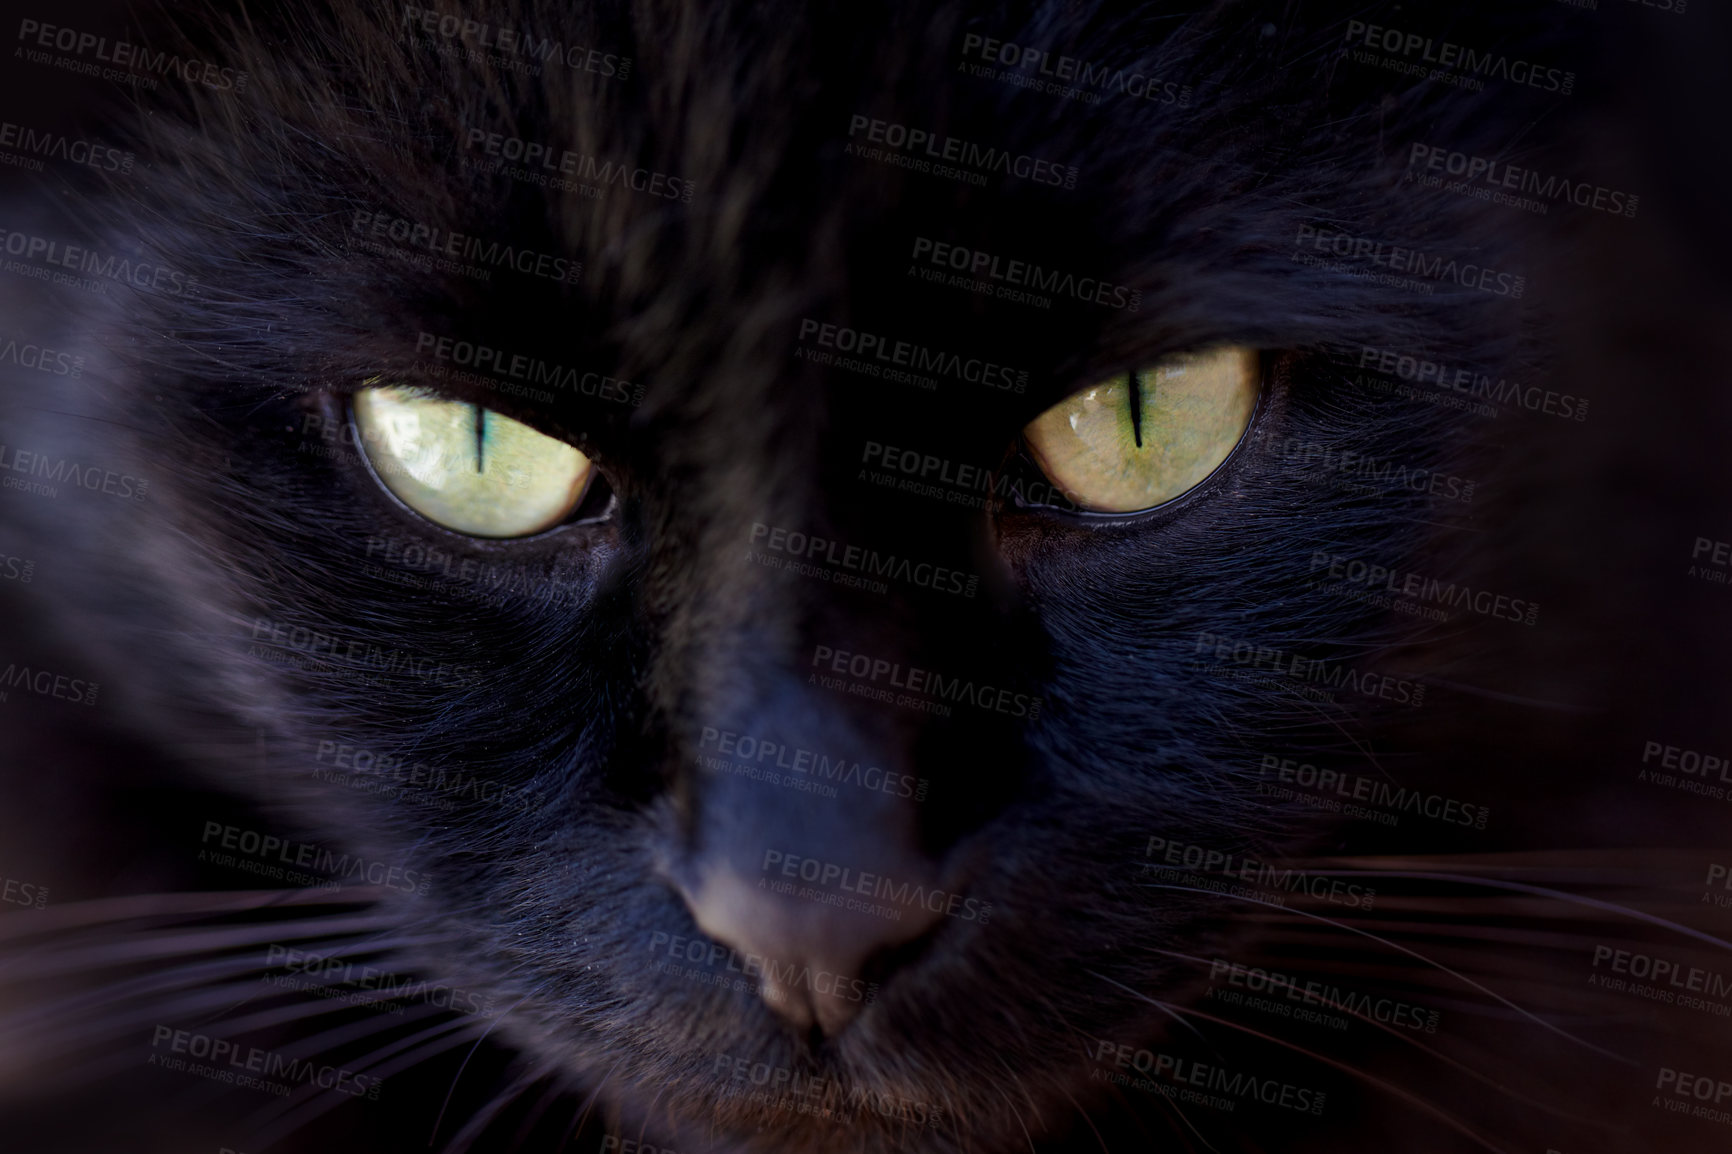 Buy stock photo Portrait, superstition and the eyes of a black cat closeup for bad luck as a symbol of spooky fear. Face, pet or animal with dark fur looking cute or adorable as a feline mammal for magic or mystery